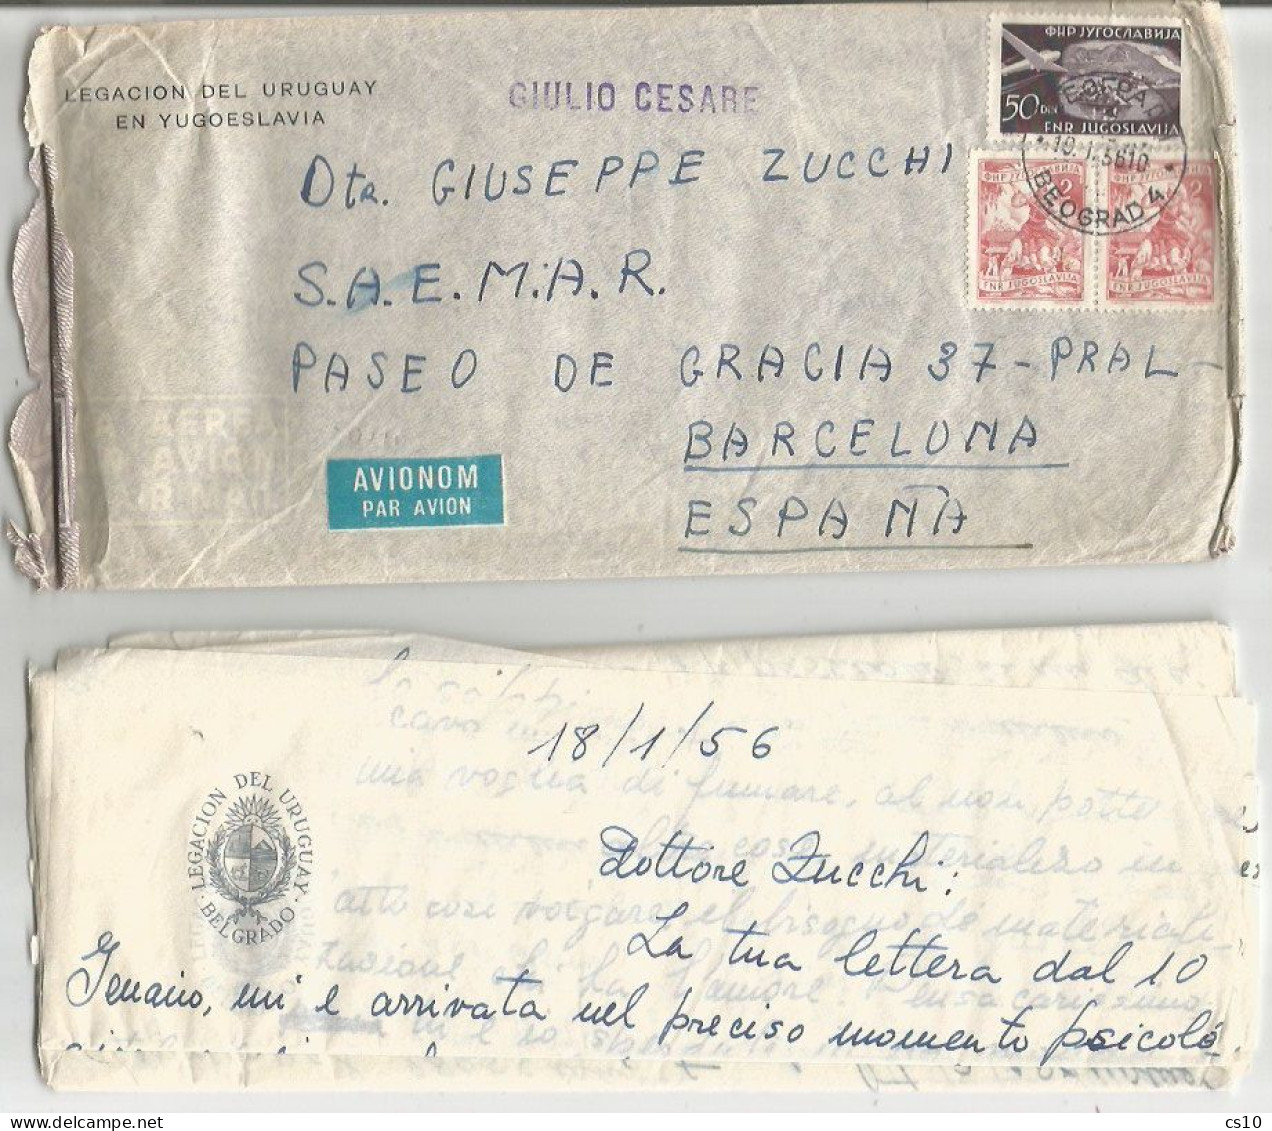 Jugoslavija Legation Uruguay AirmailCV Beograd 19jan1956 X Spain To S/S "Giulio Cesare" With Content (6pages) - Airmail